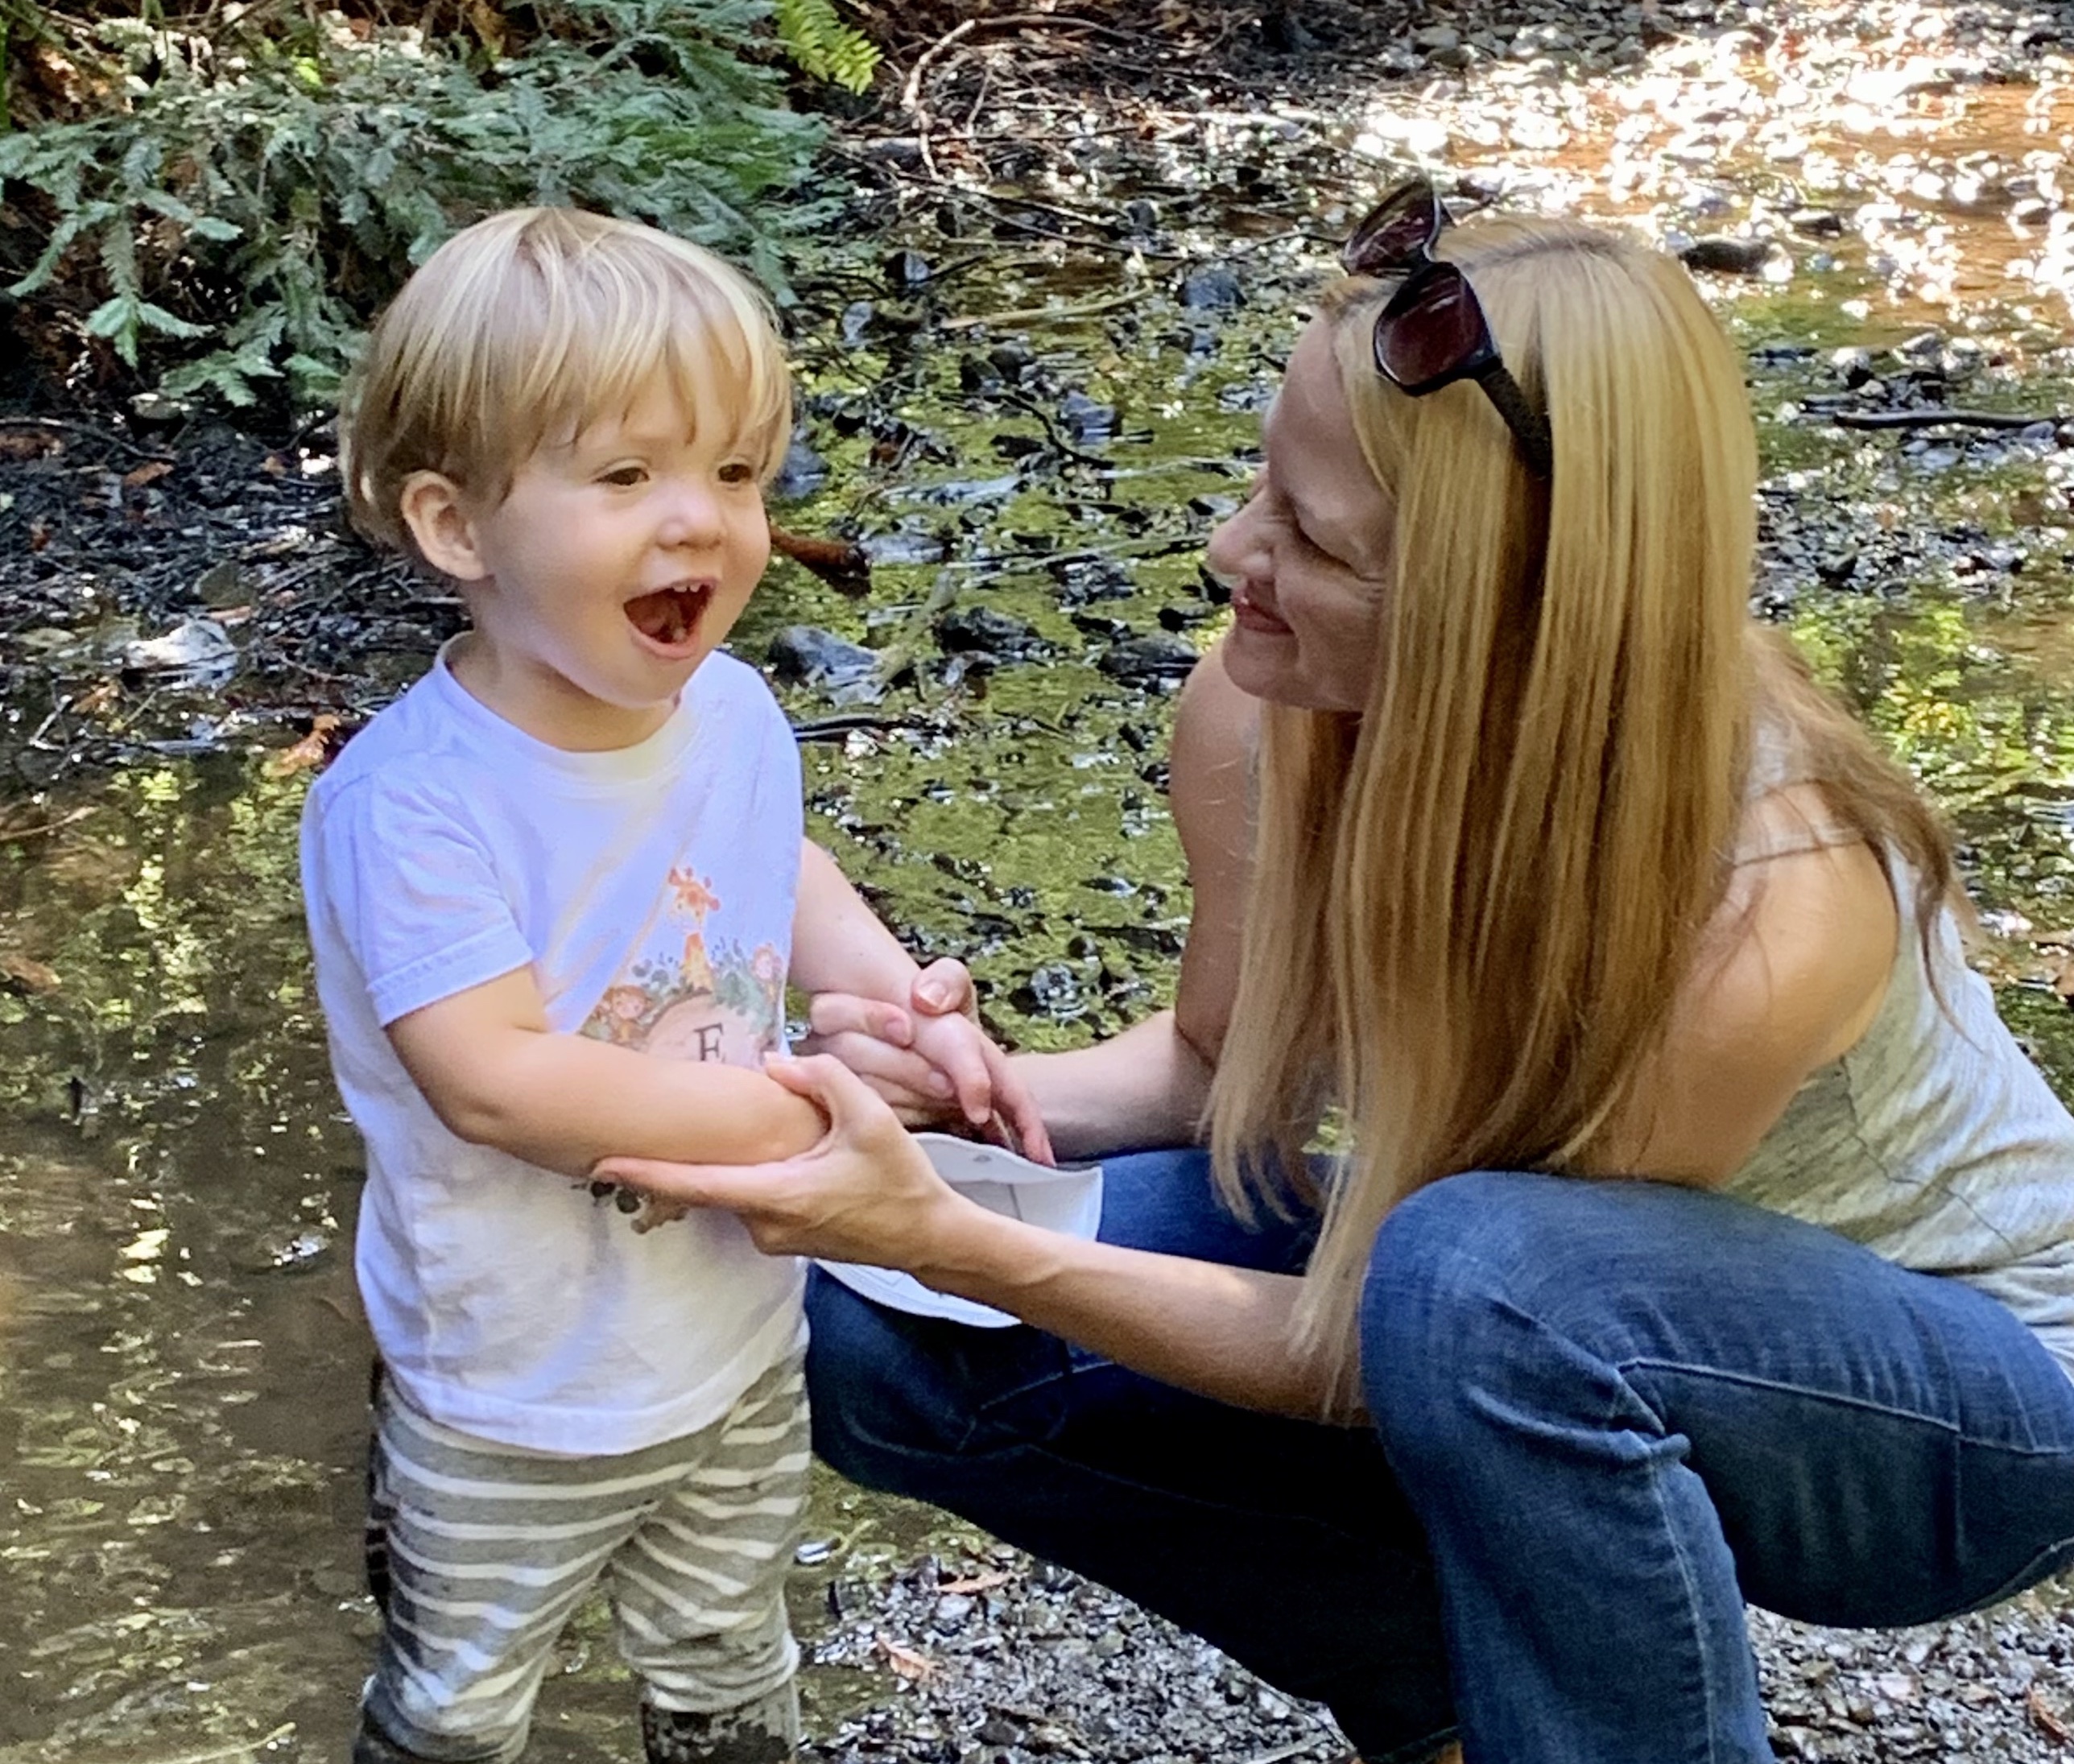 Pamela Green and her son enjoying the Bay Area parks.